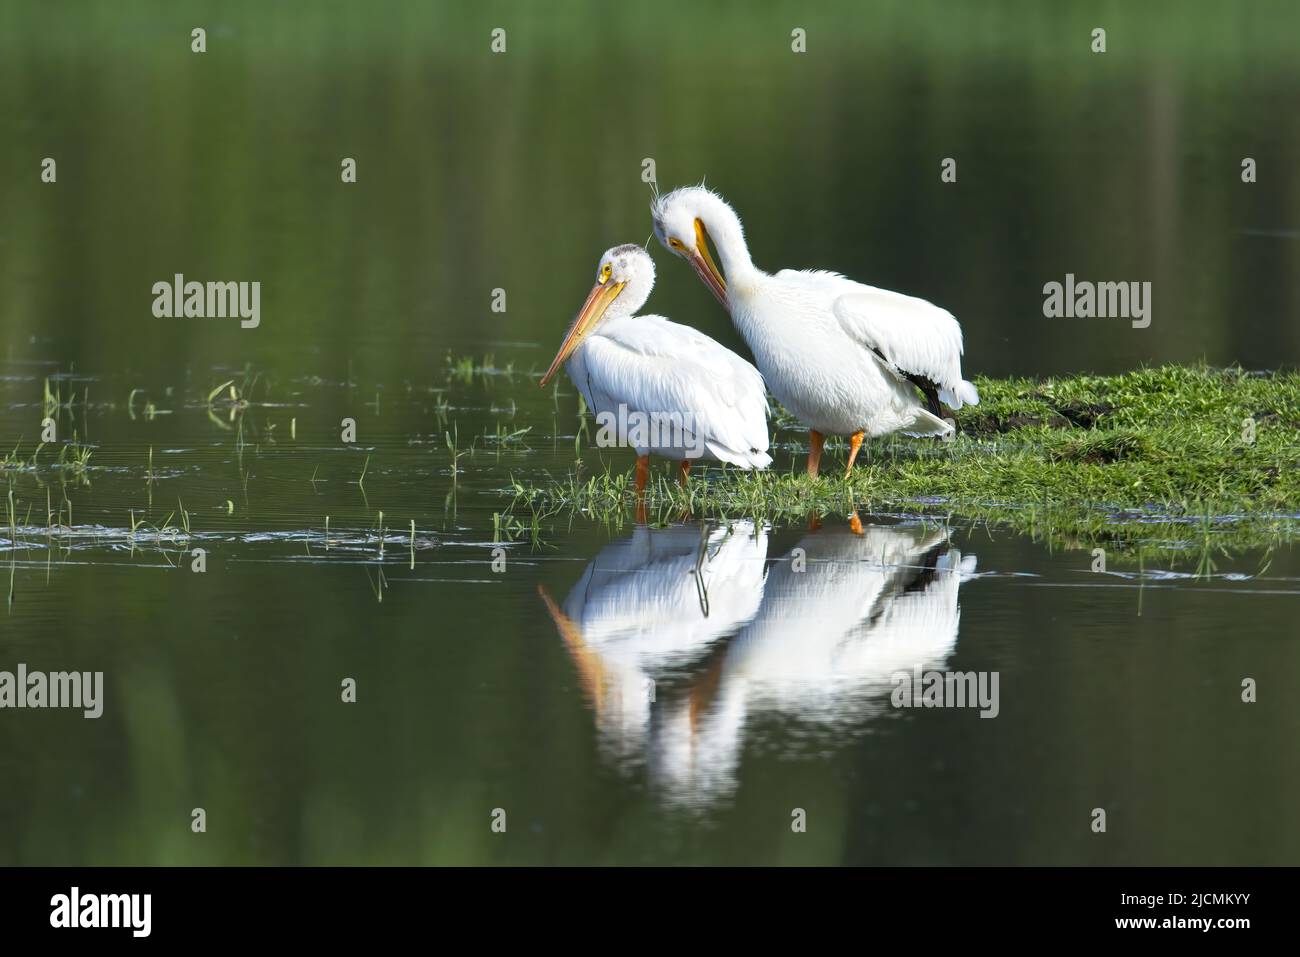 Two American white pelicans stand next to a calm pond in Hauser, Idaho. Stock Photo